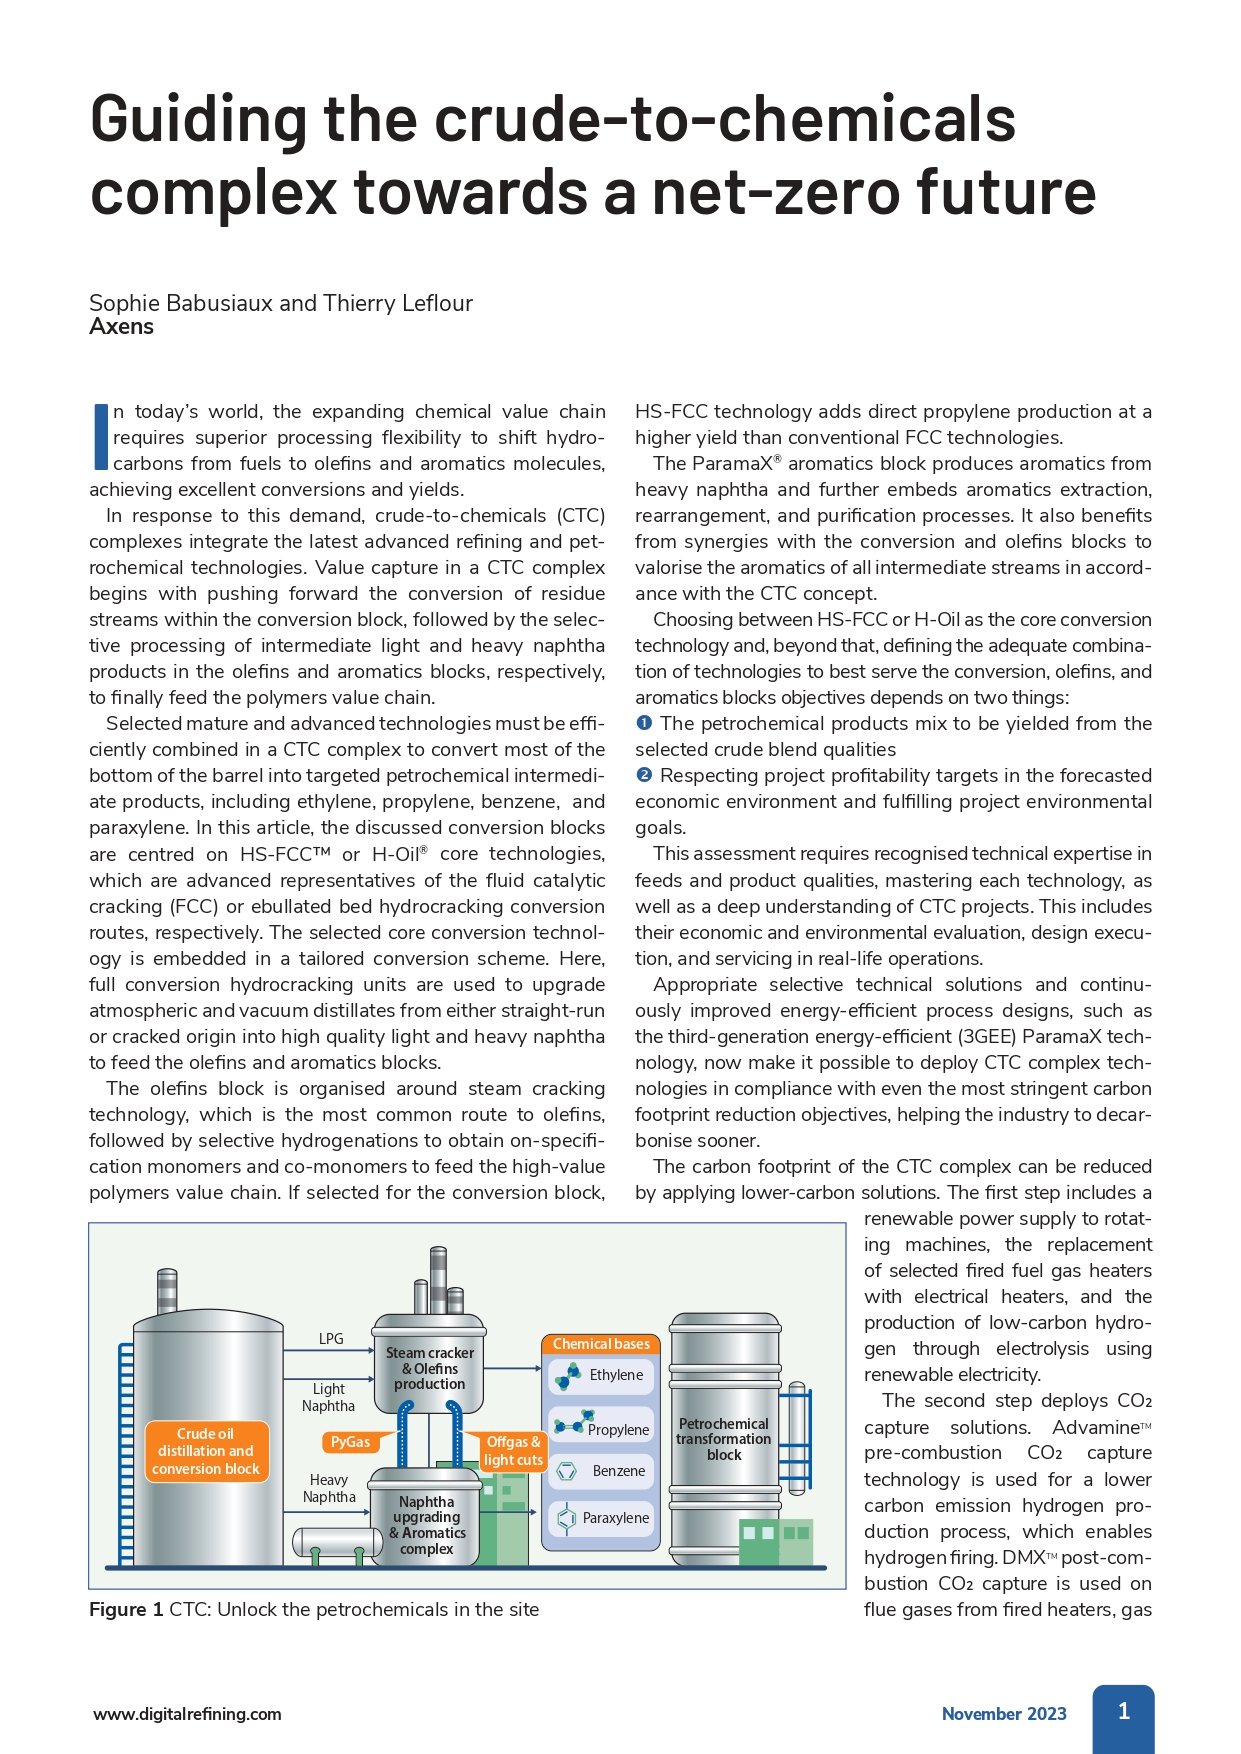 Thumb_TA_Guiding the crude-to-chemicals complex towards a net-zero future_page-0001